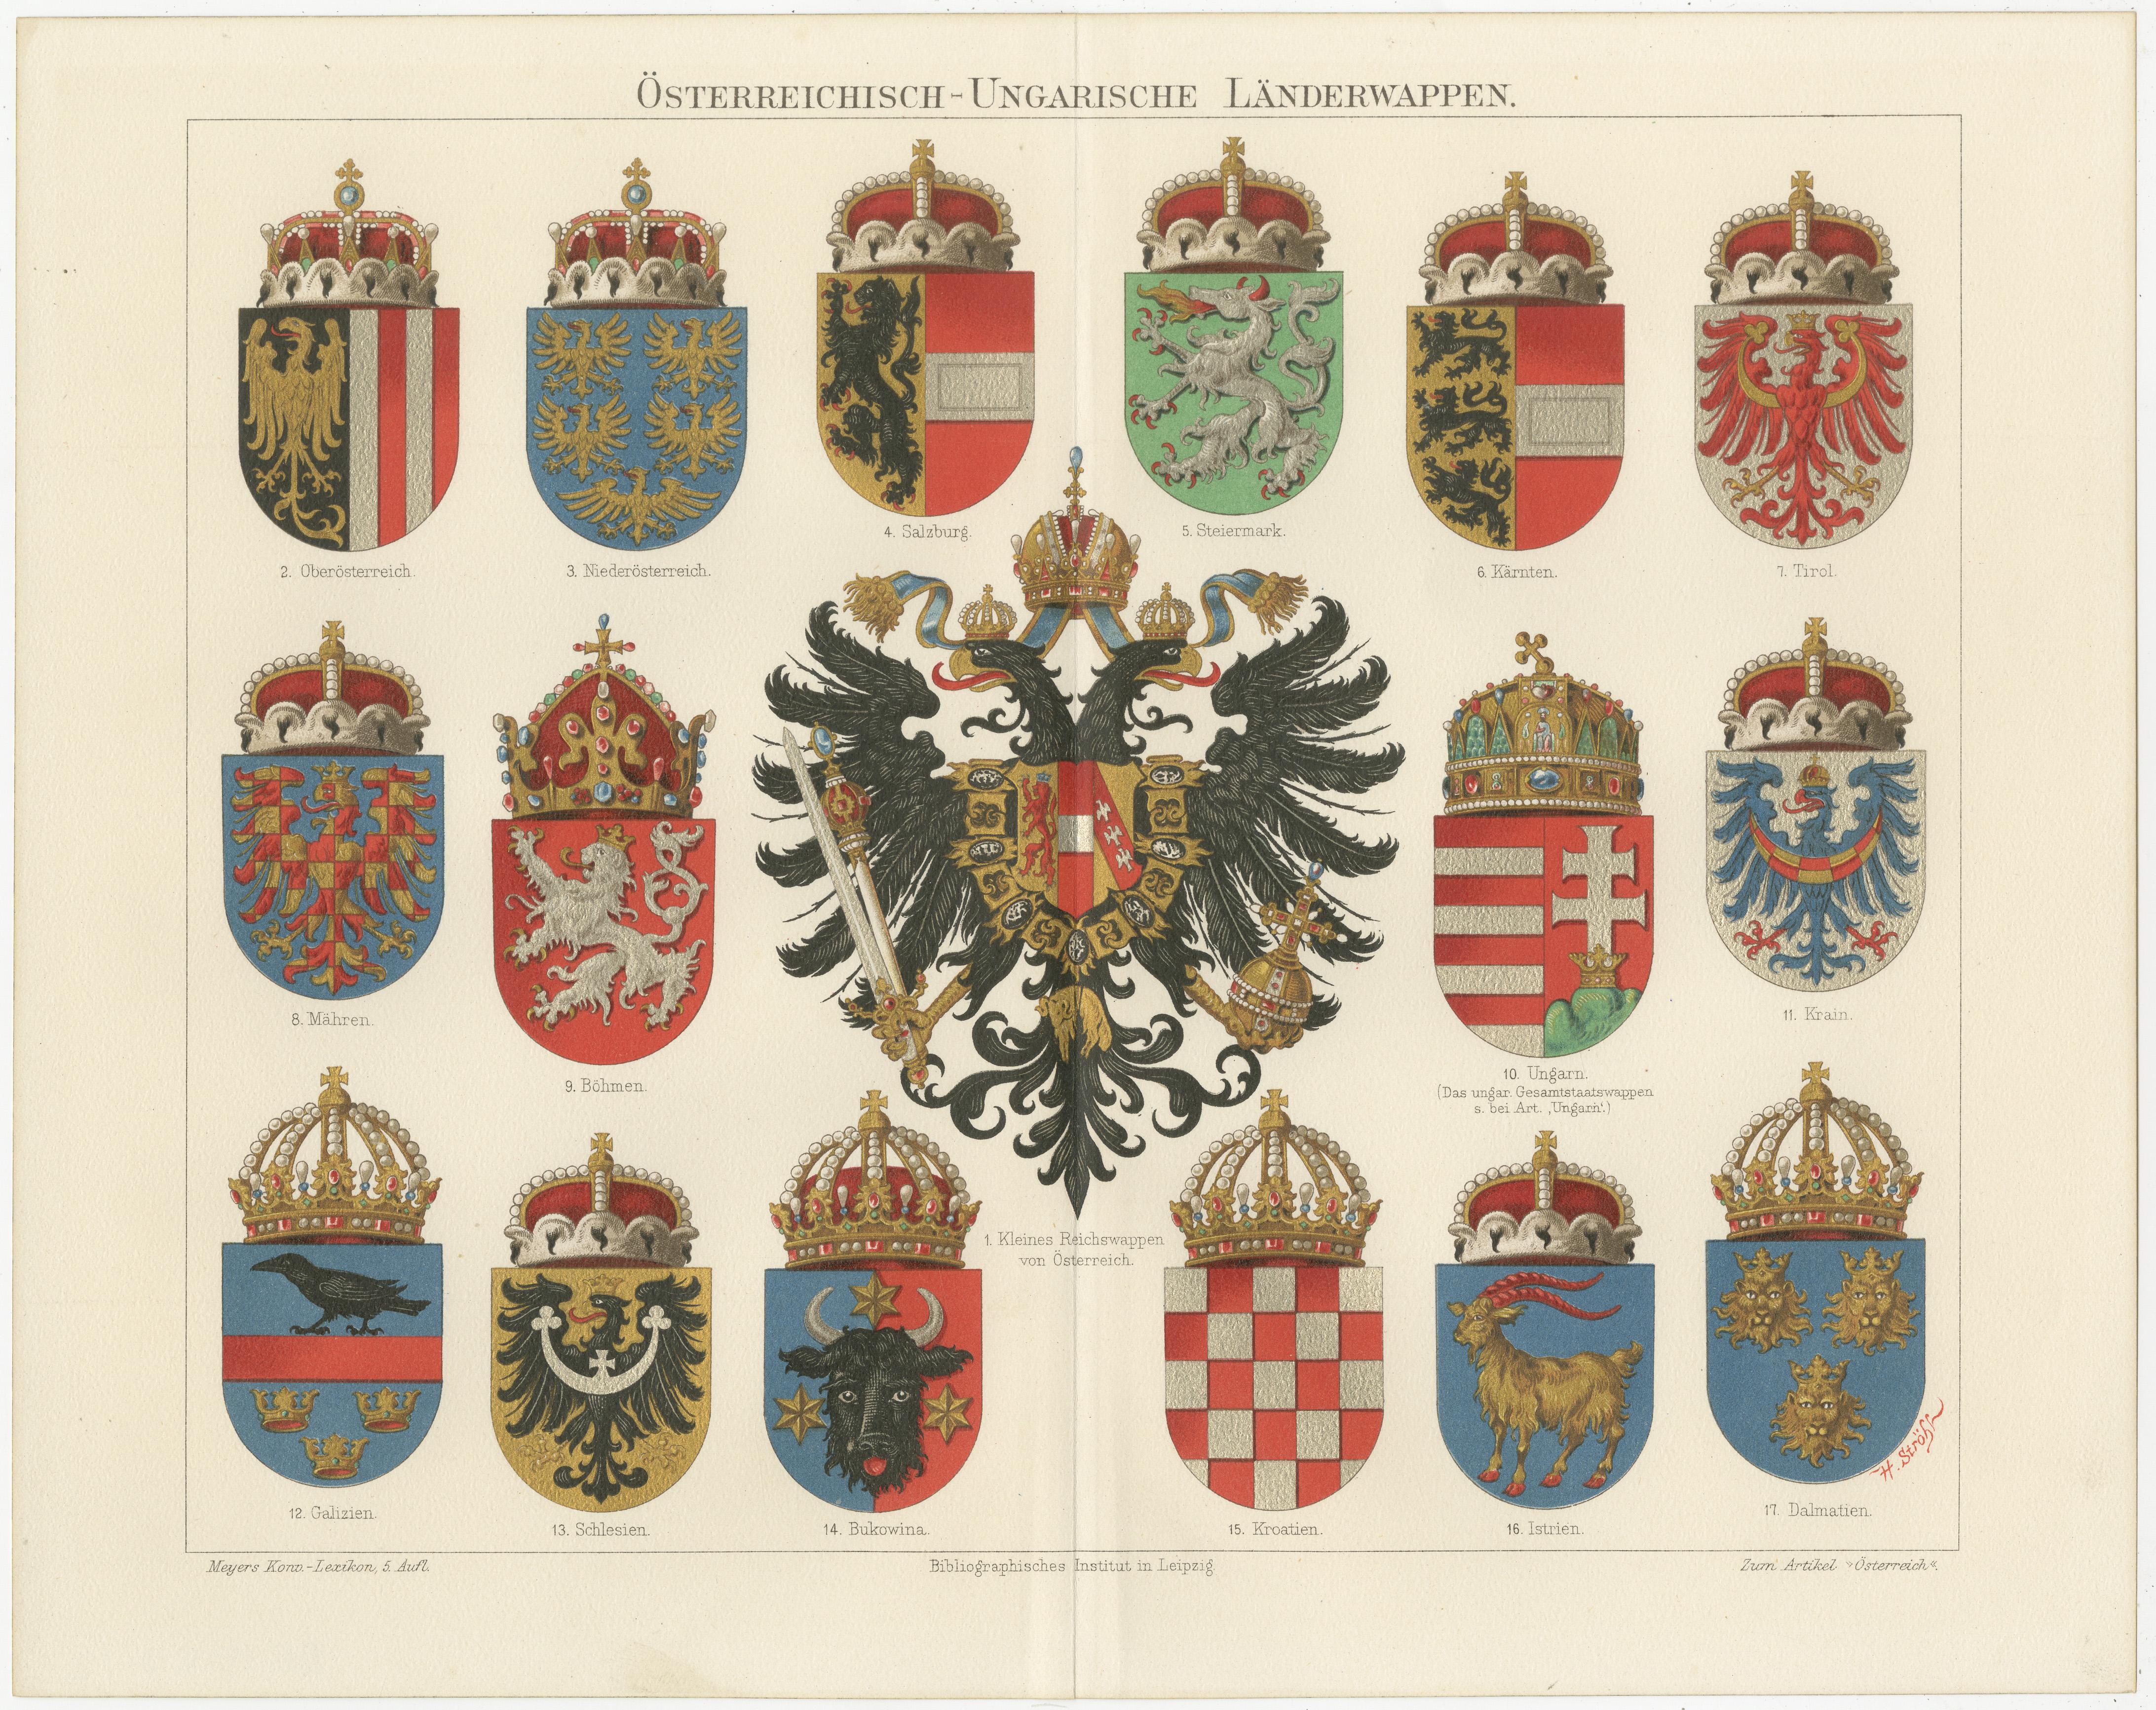 Antique print titled 'Österreichisch-Ungarische Länderwappen'. Original antique chromolithograph of Austro-Hungarian coats of arms. This print originates from Volume 5 of Meyers Konversations-Lexikon, published between 1893 and 1897. 

Meyers